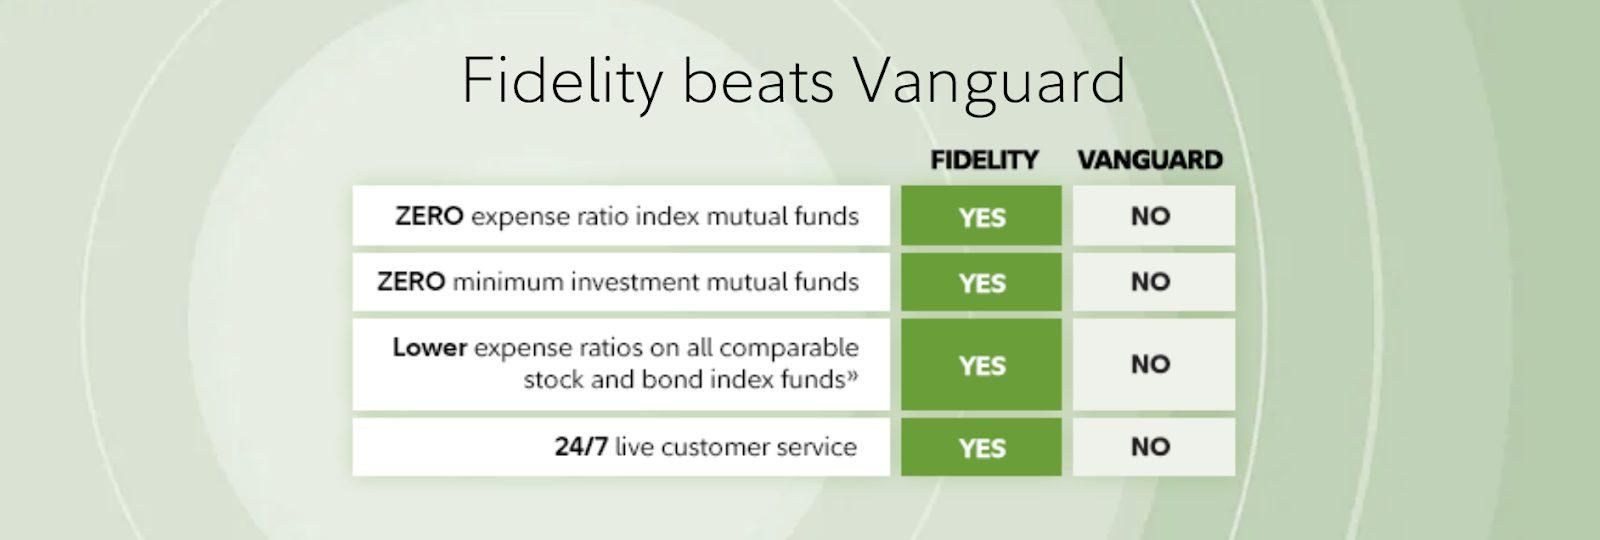 Vanguard Vs Fidelity: Fidelity vs Vanguard: Tools, Resources, and Standout Features